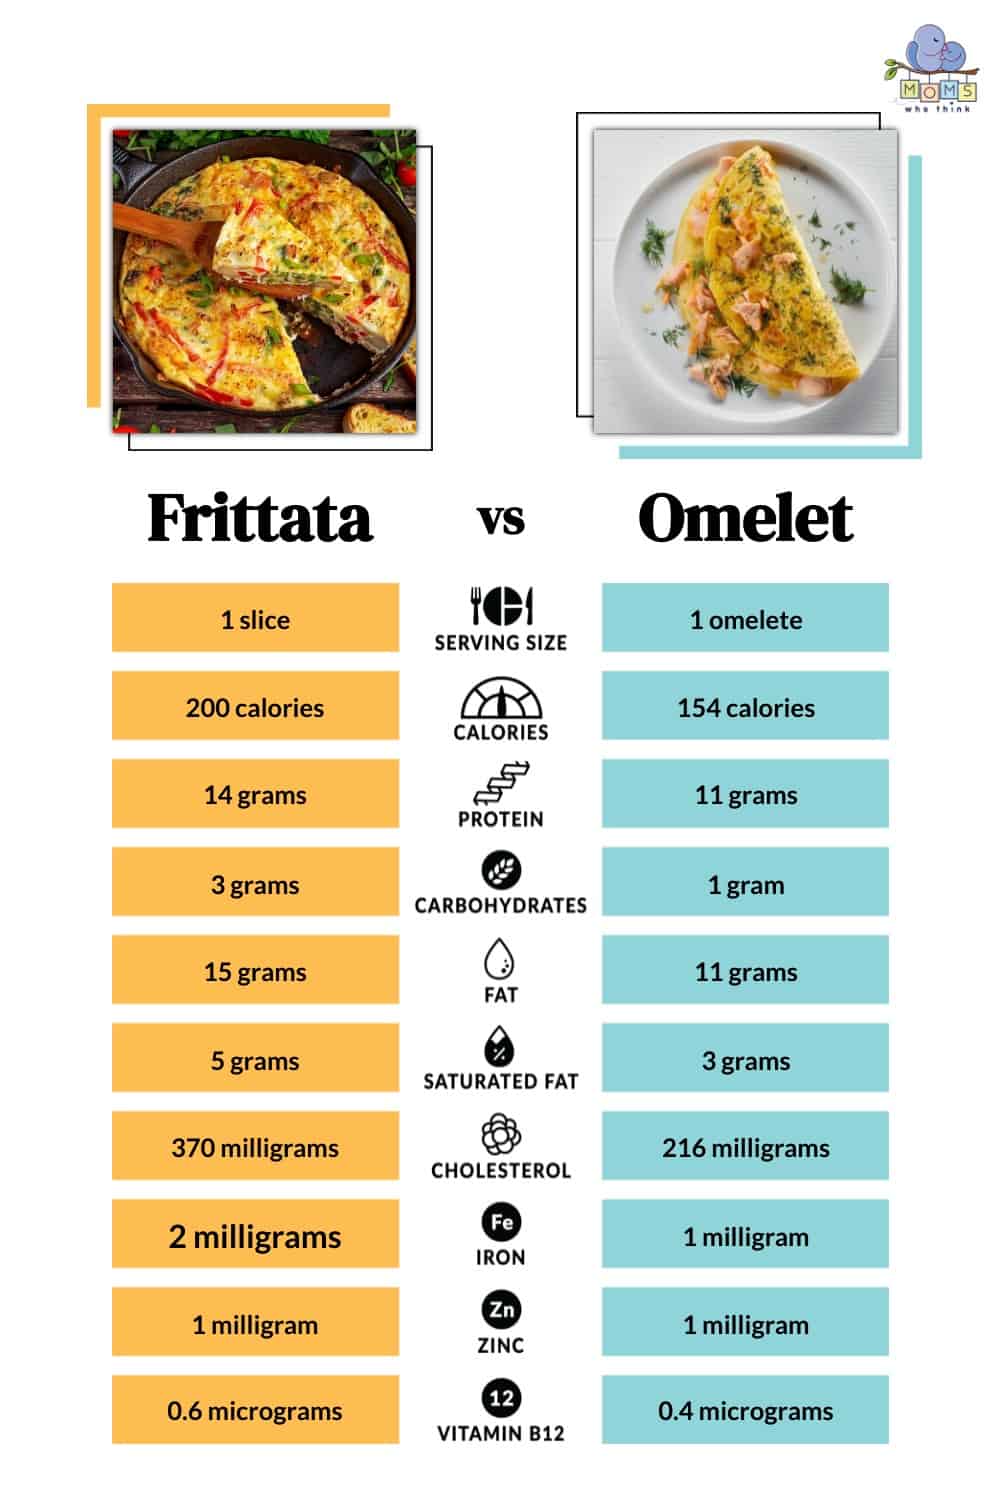 Frittata vs Omelet: Which is Healthier